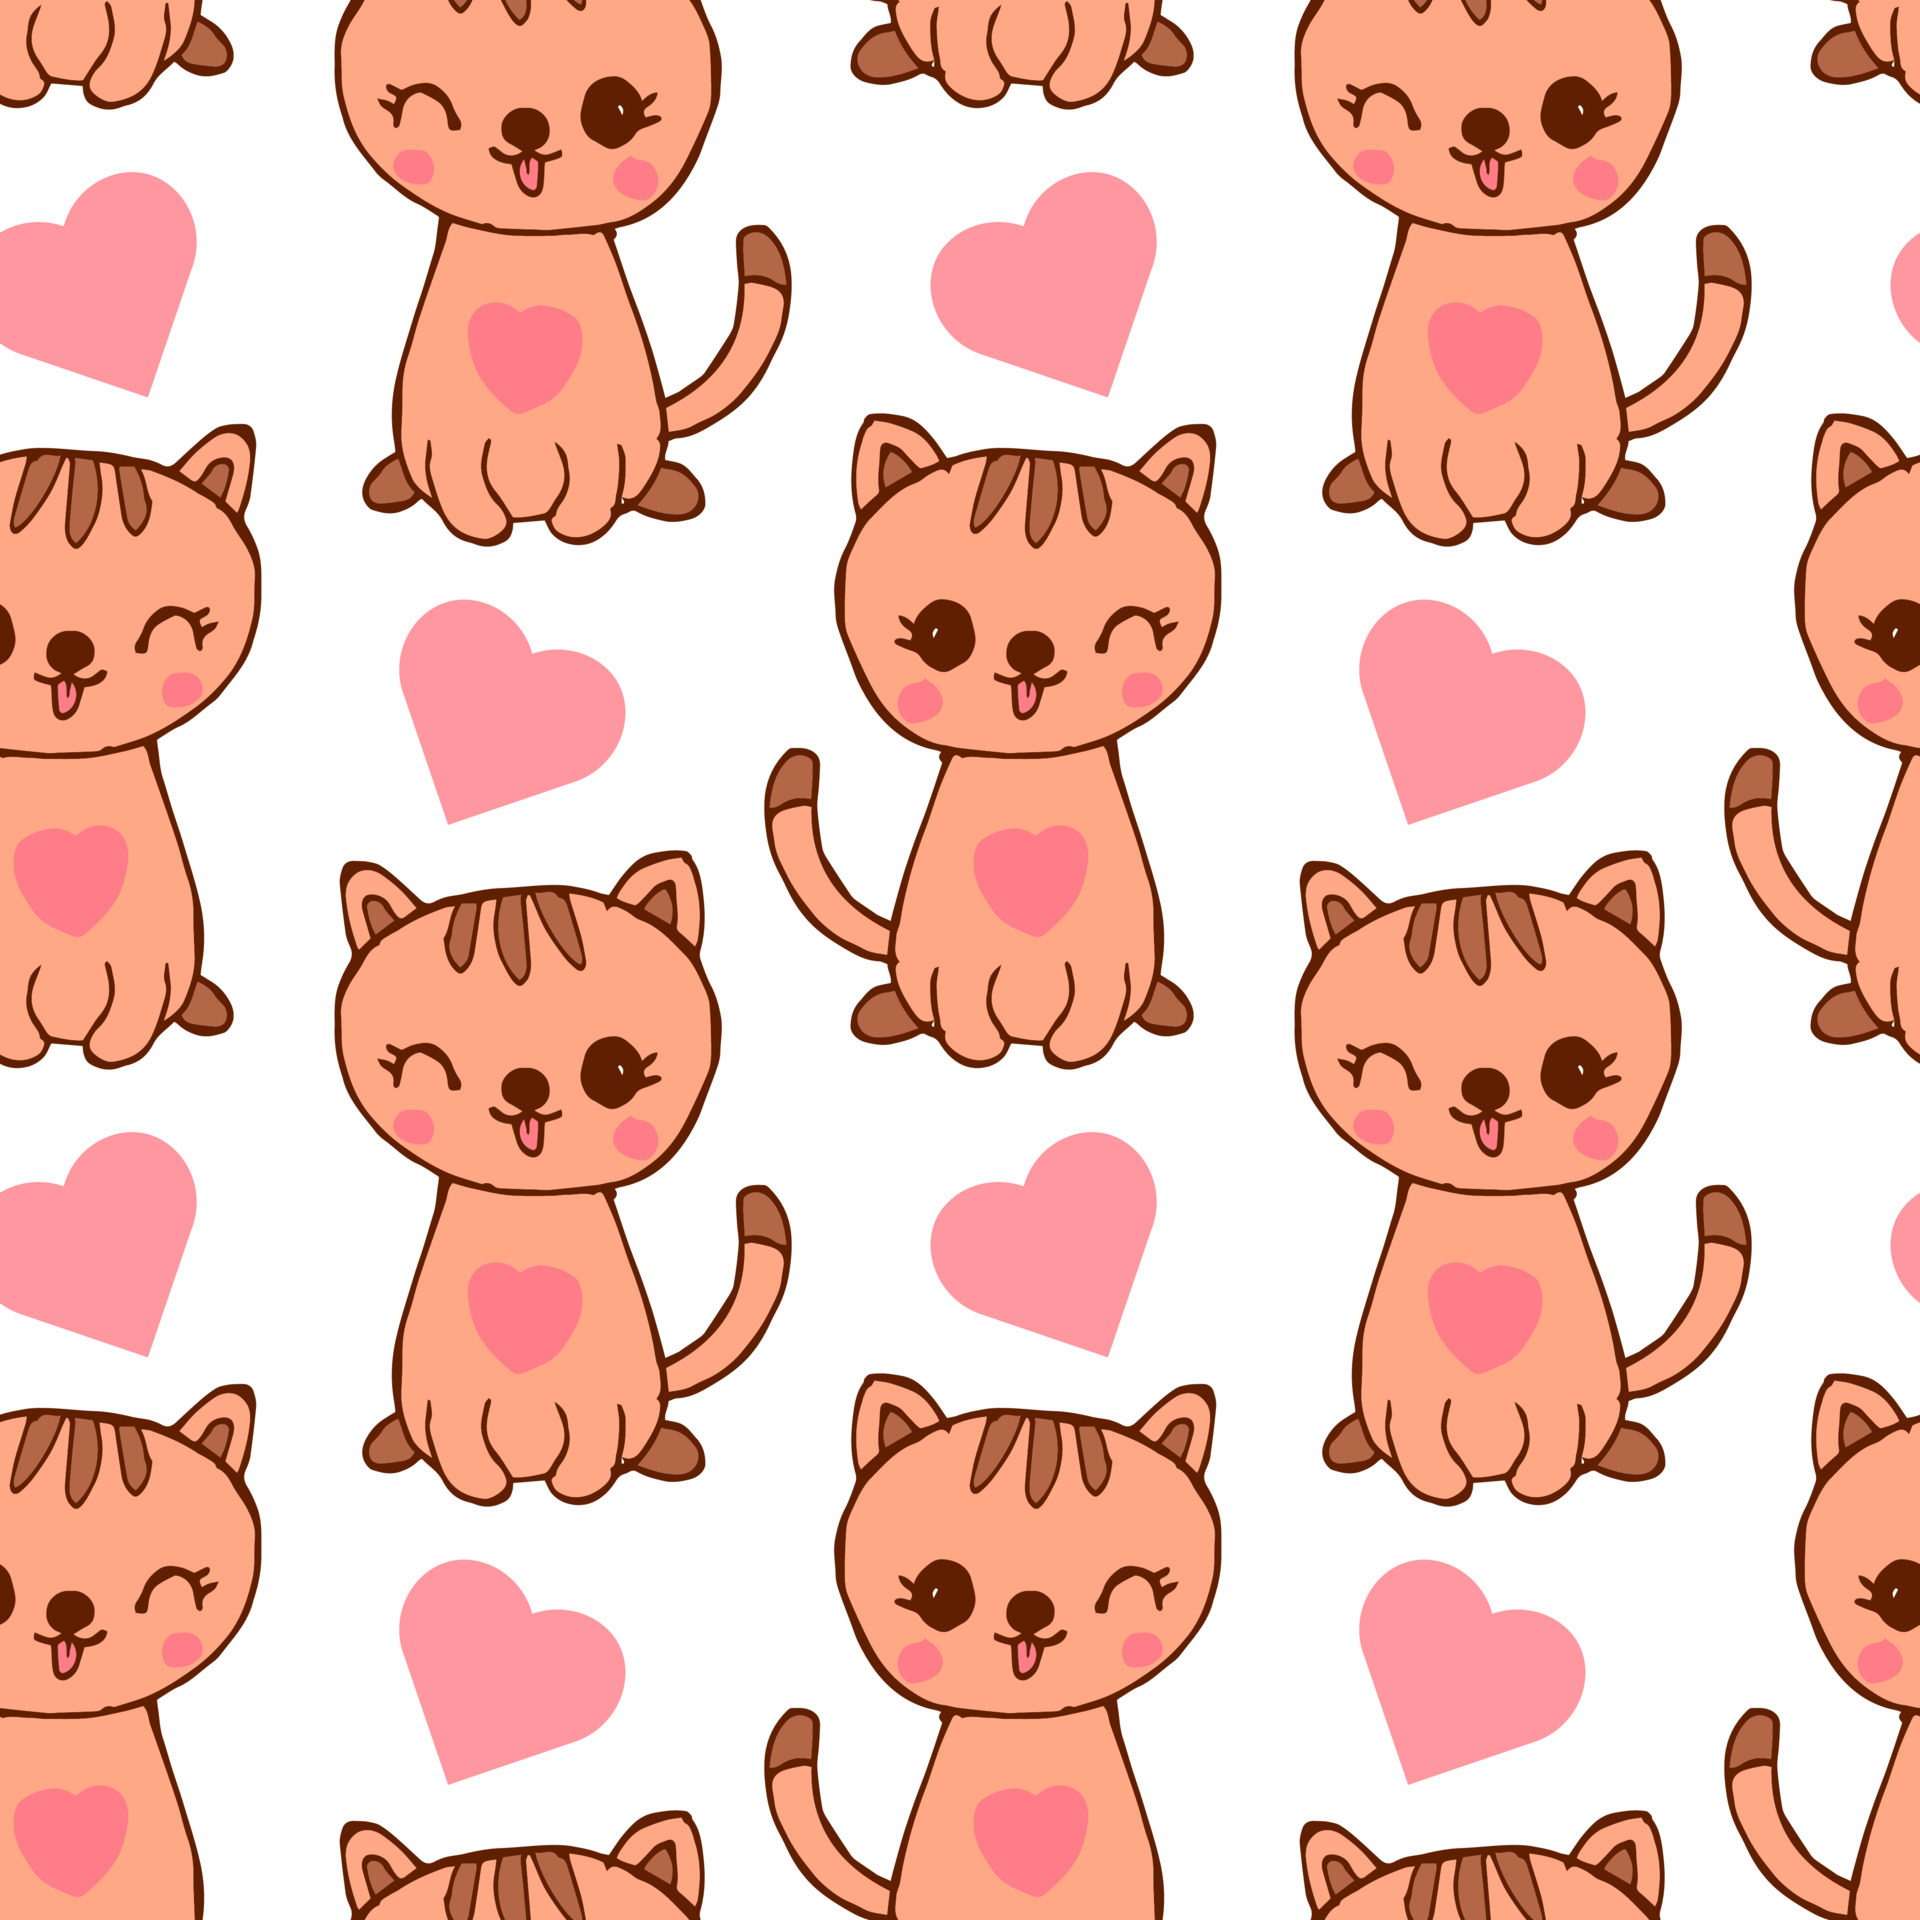 1920x1920 Seamless pattern, hand-drawn cute kitten with heart. Design for birthday and St. Valentines day greeting cards, textiles, wallpaper 4660548 Vector Art